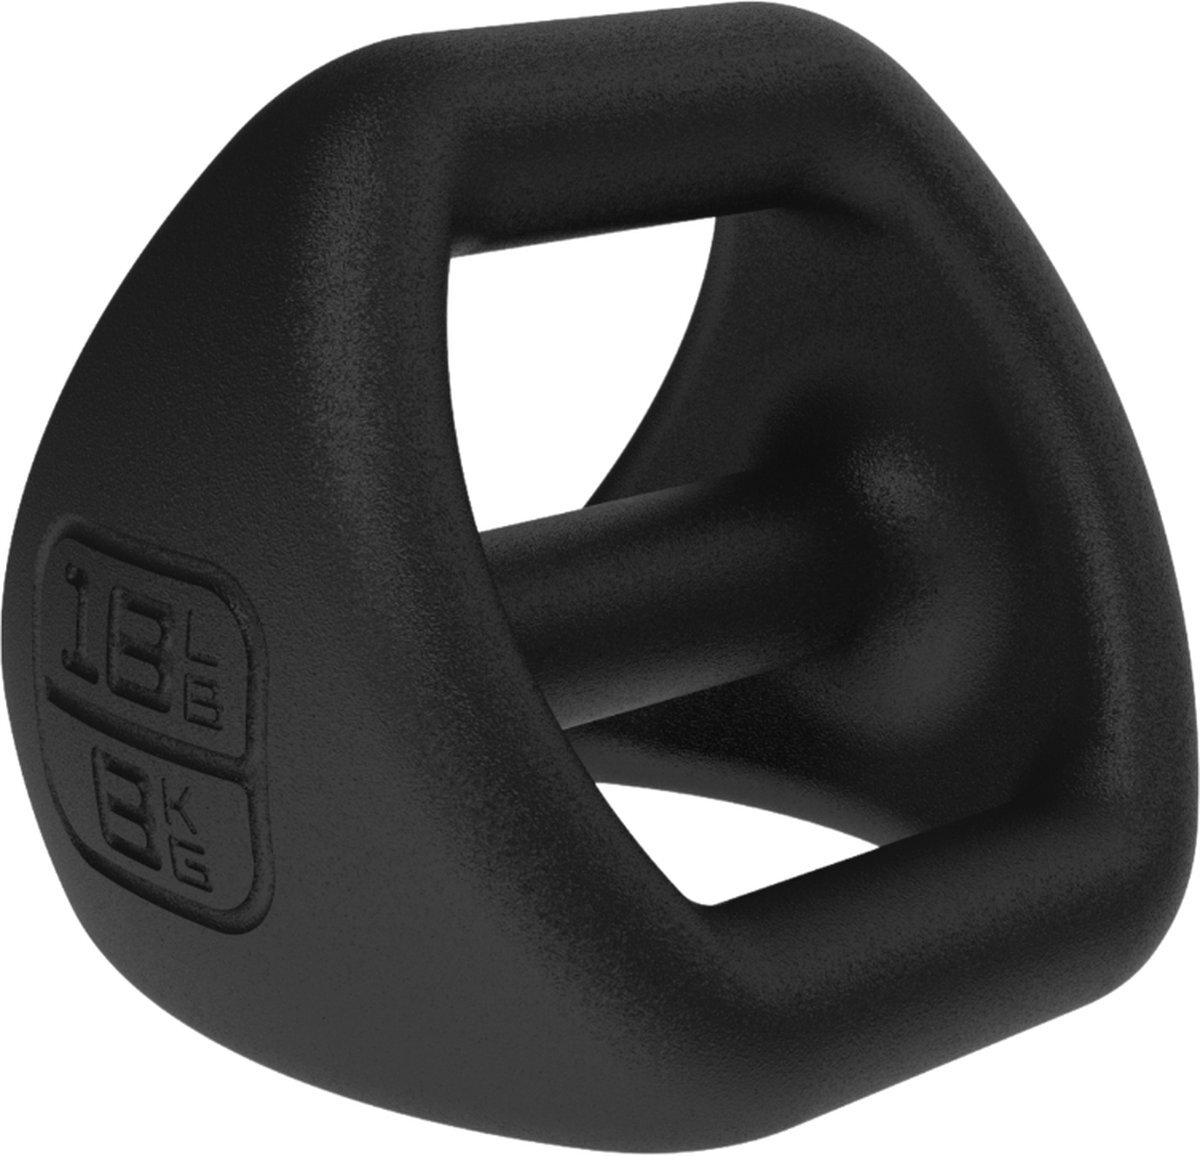 Ybell Fitness YBell Pro 8kg